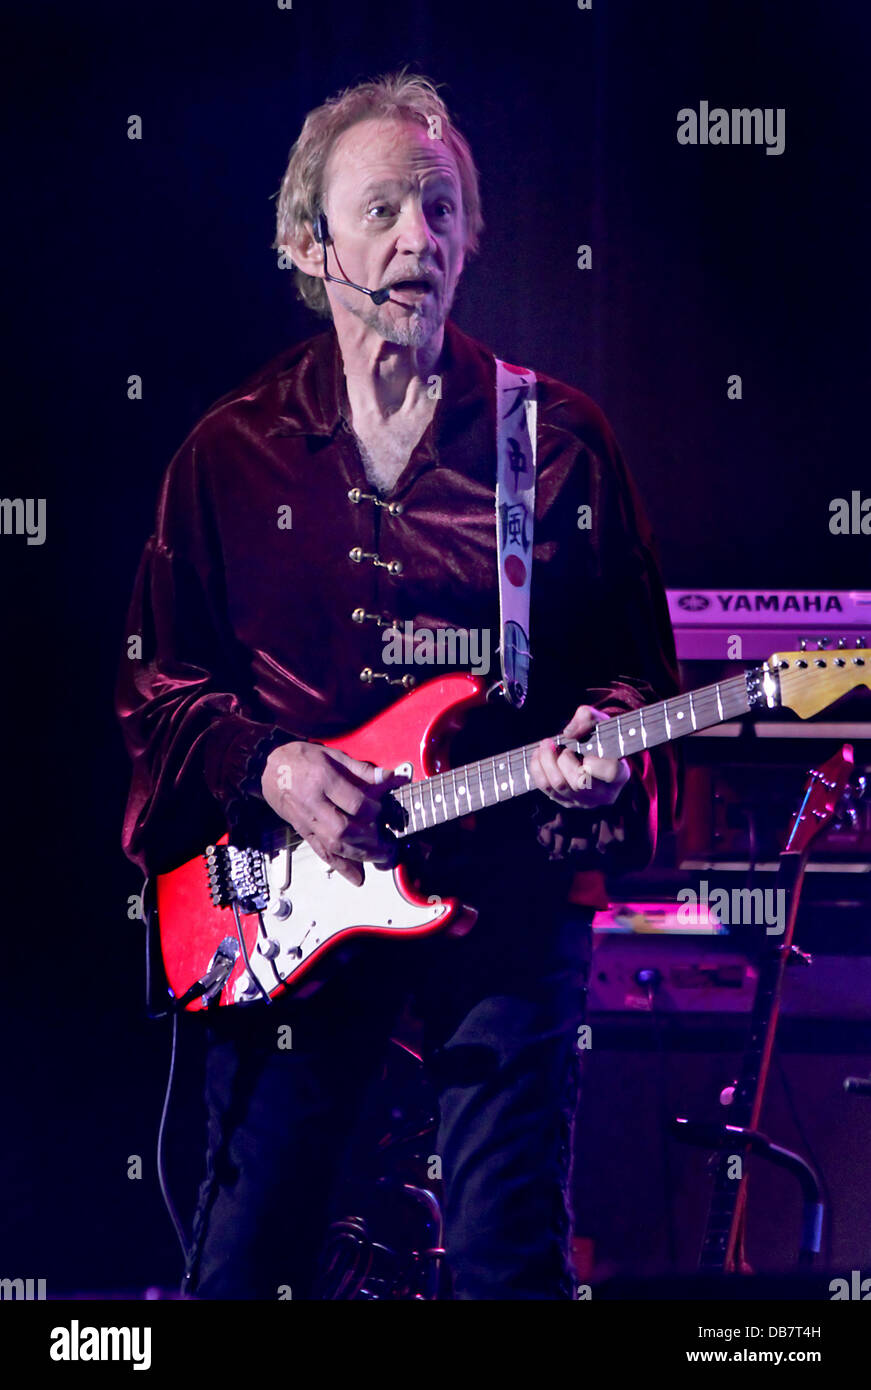 Peter Tork The Monkees performing at Manchester O2 Apollo Theatre  Manchester, England - 14.05.11 Stock Photo